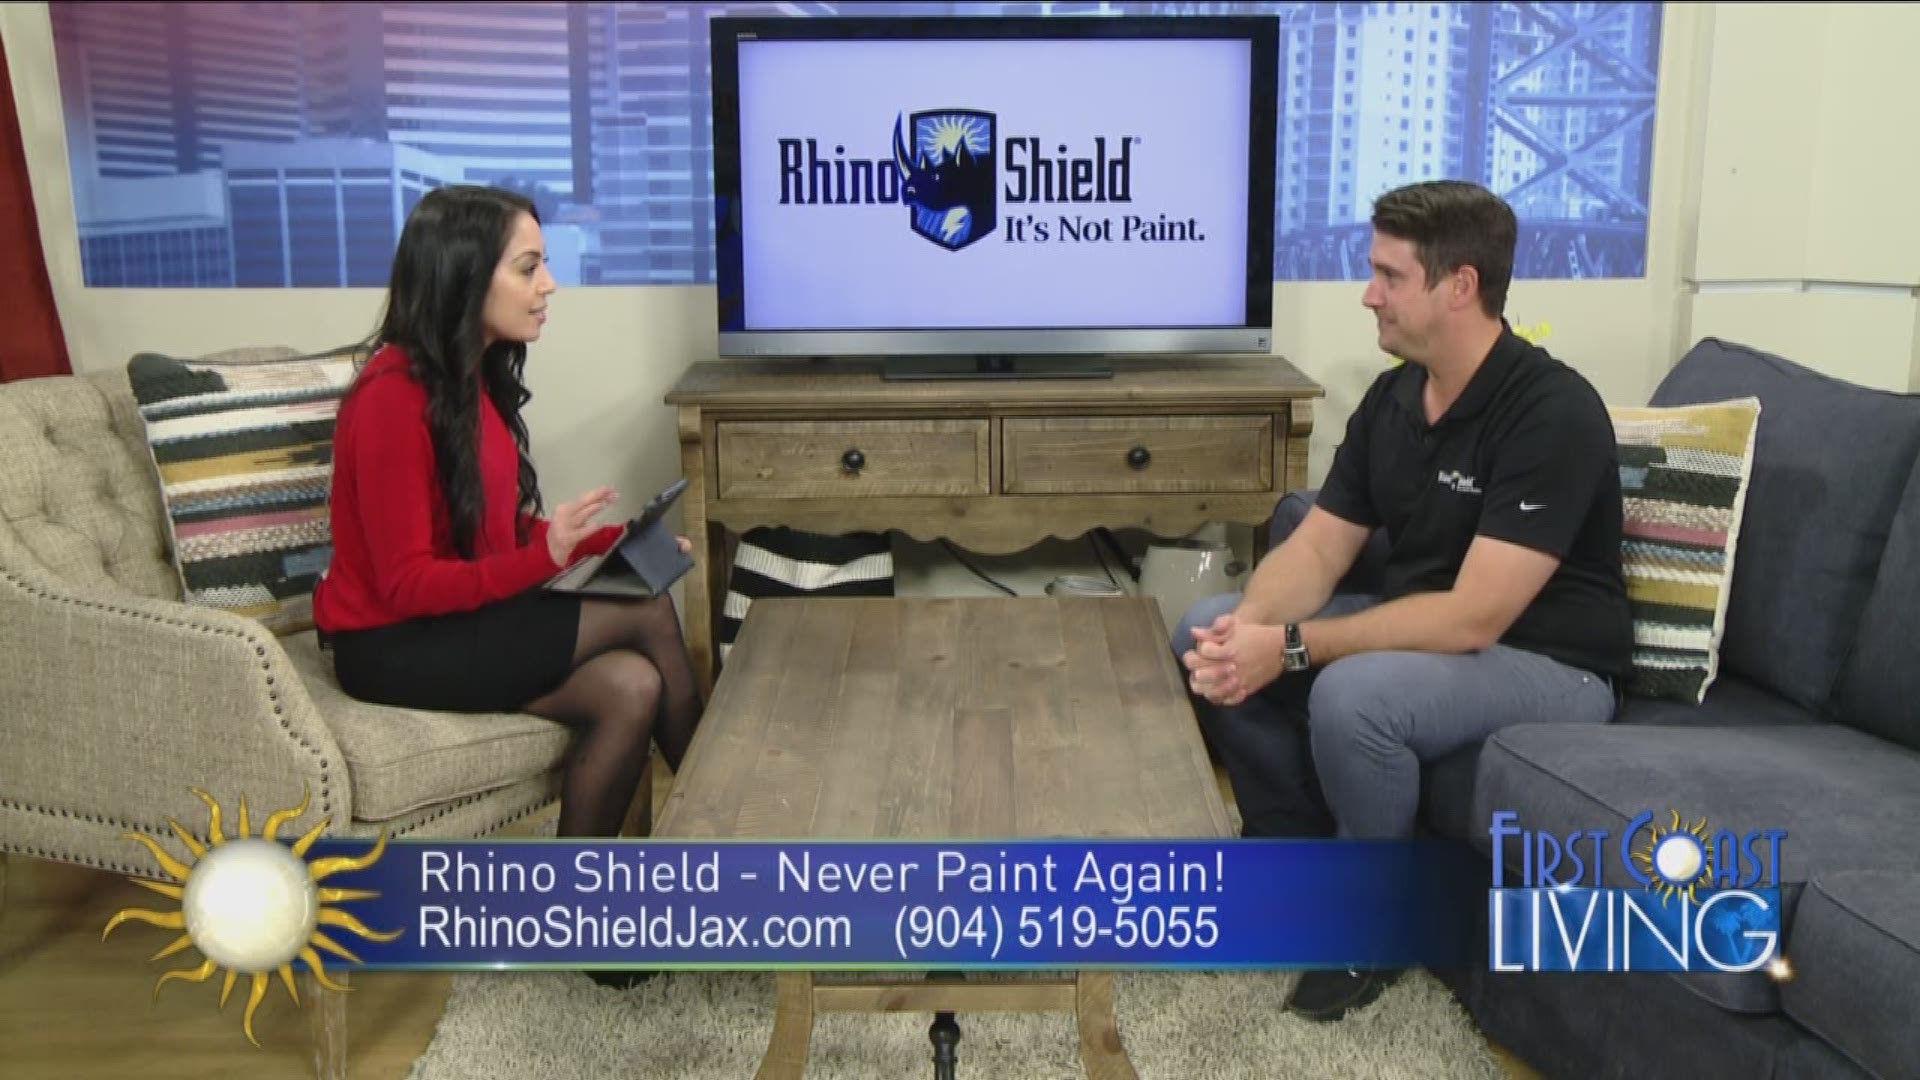 Looking to upgrade the appearance of your home? Check out what Rhino Shield has to offer.